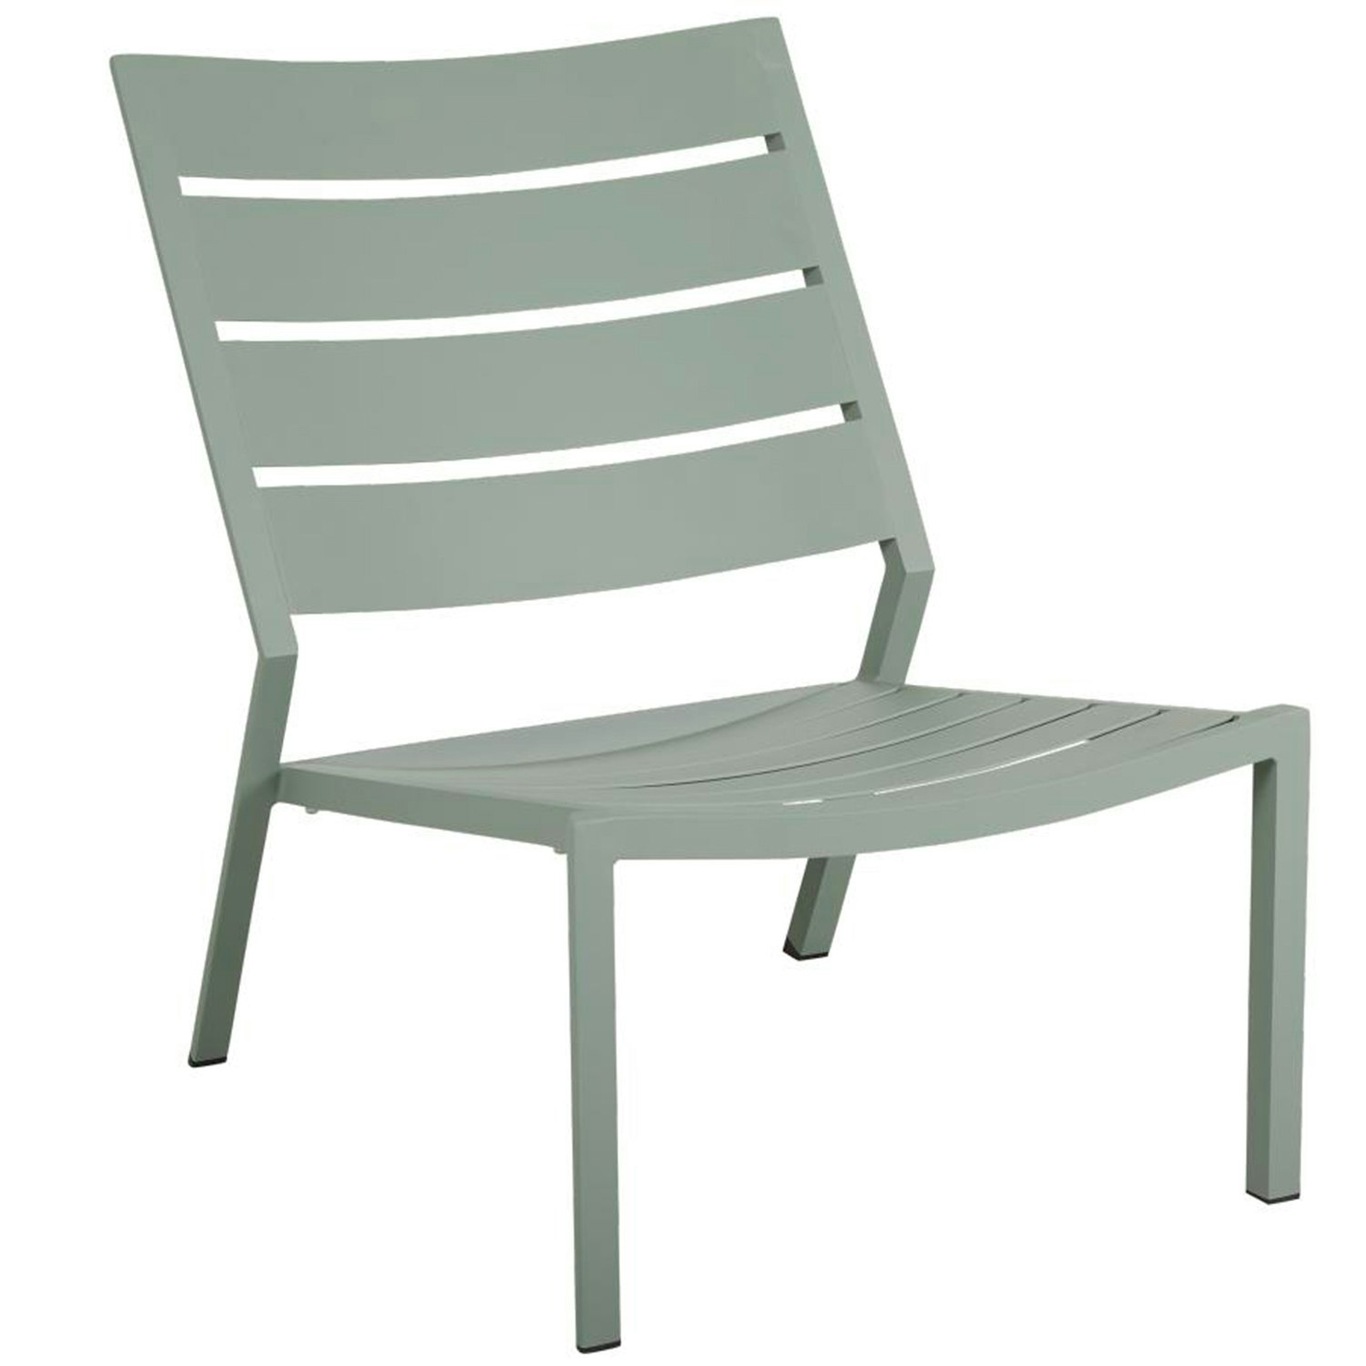 Delia relax dusty green Loungesessel